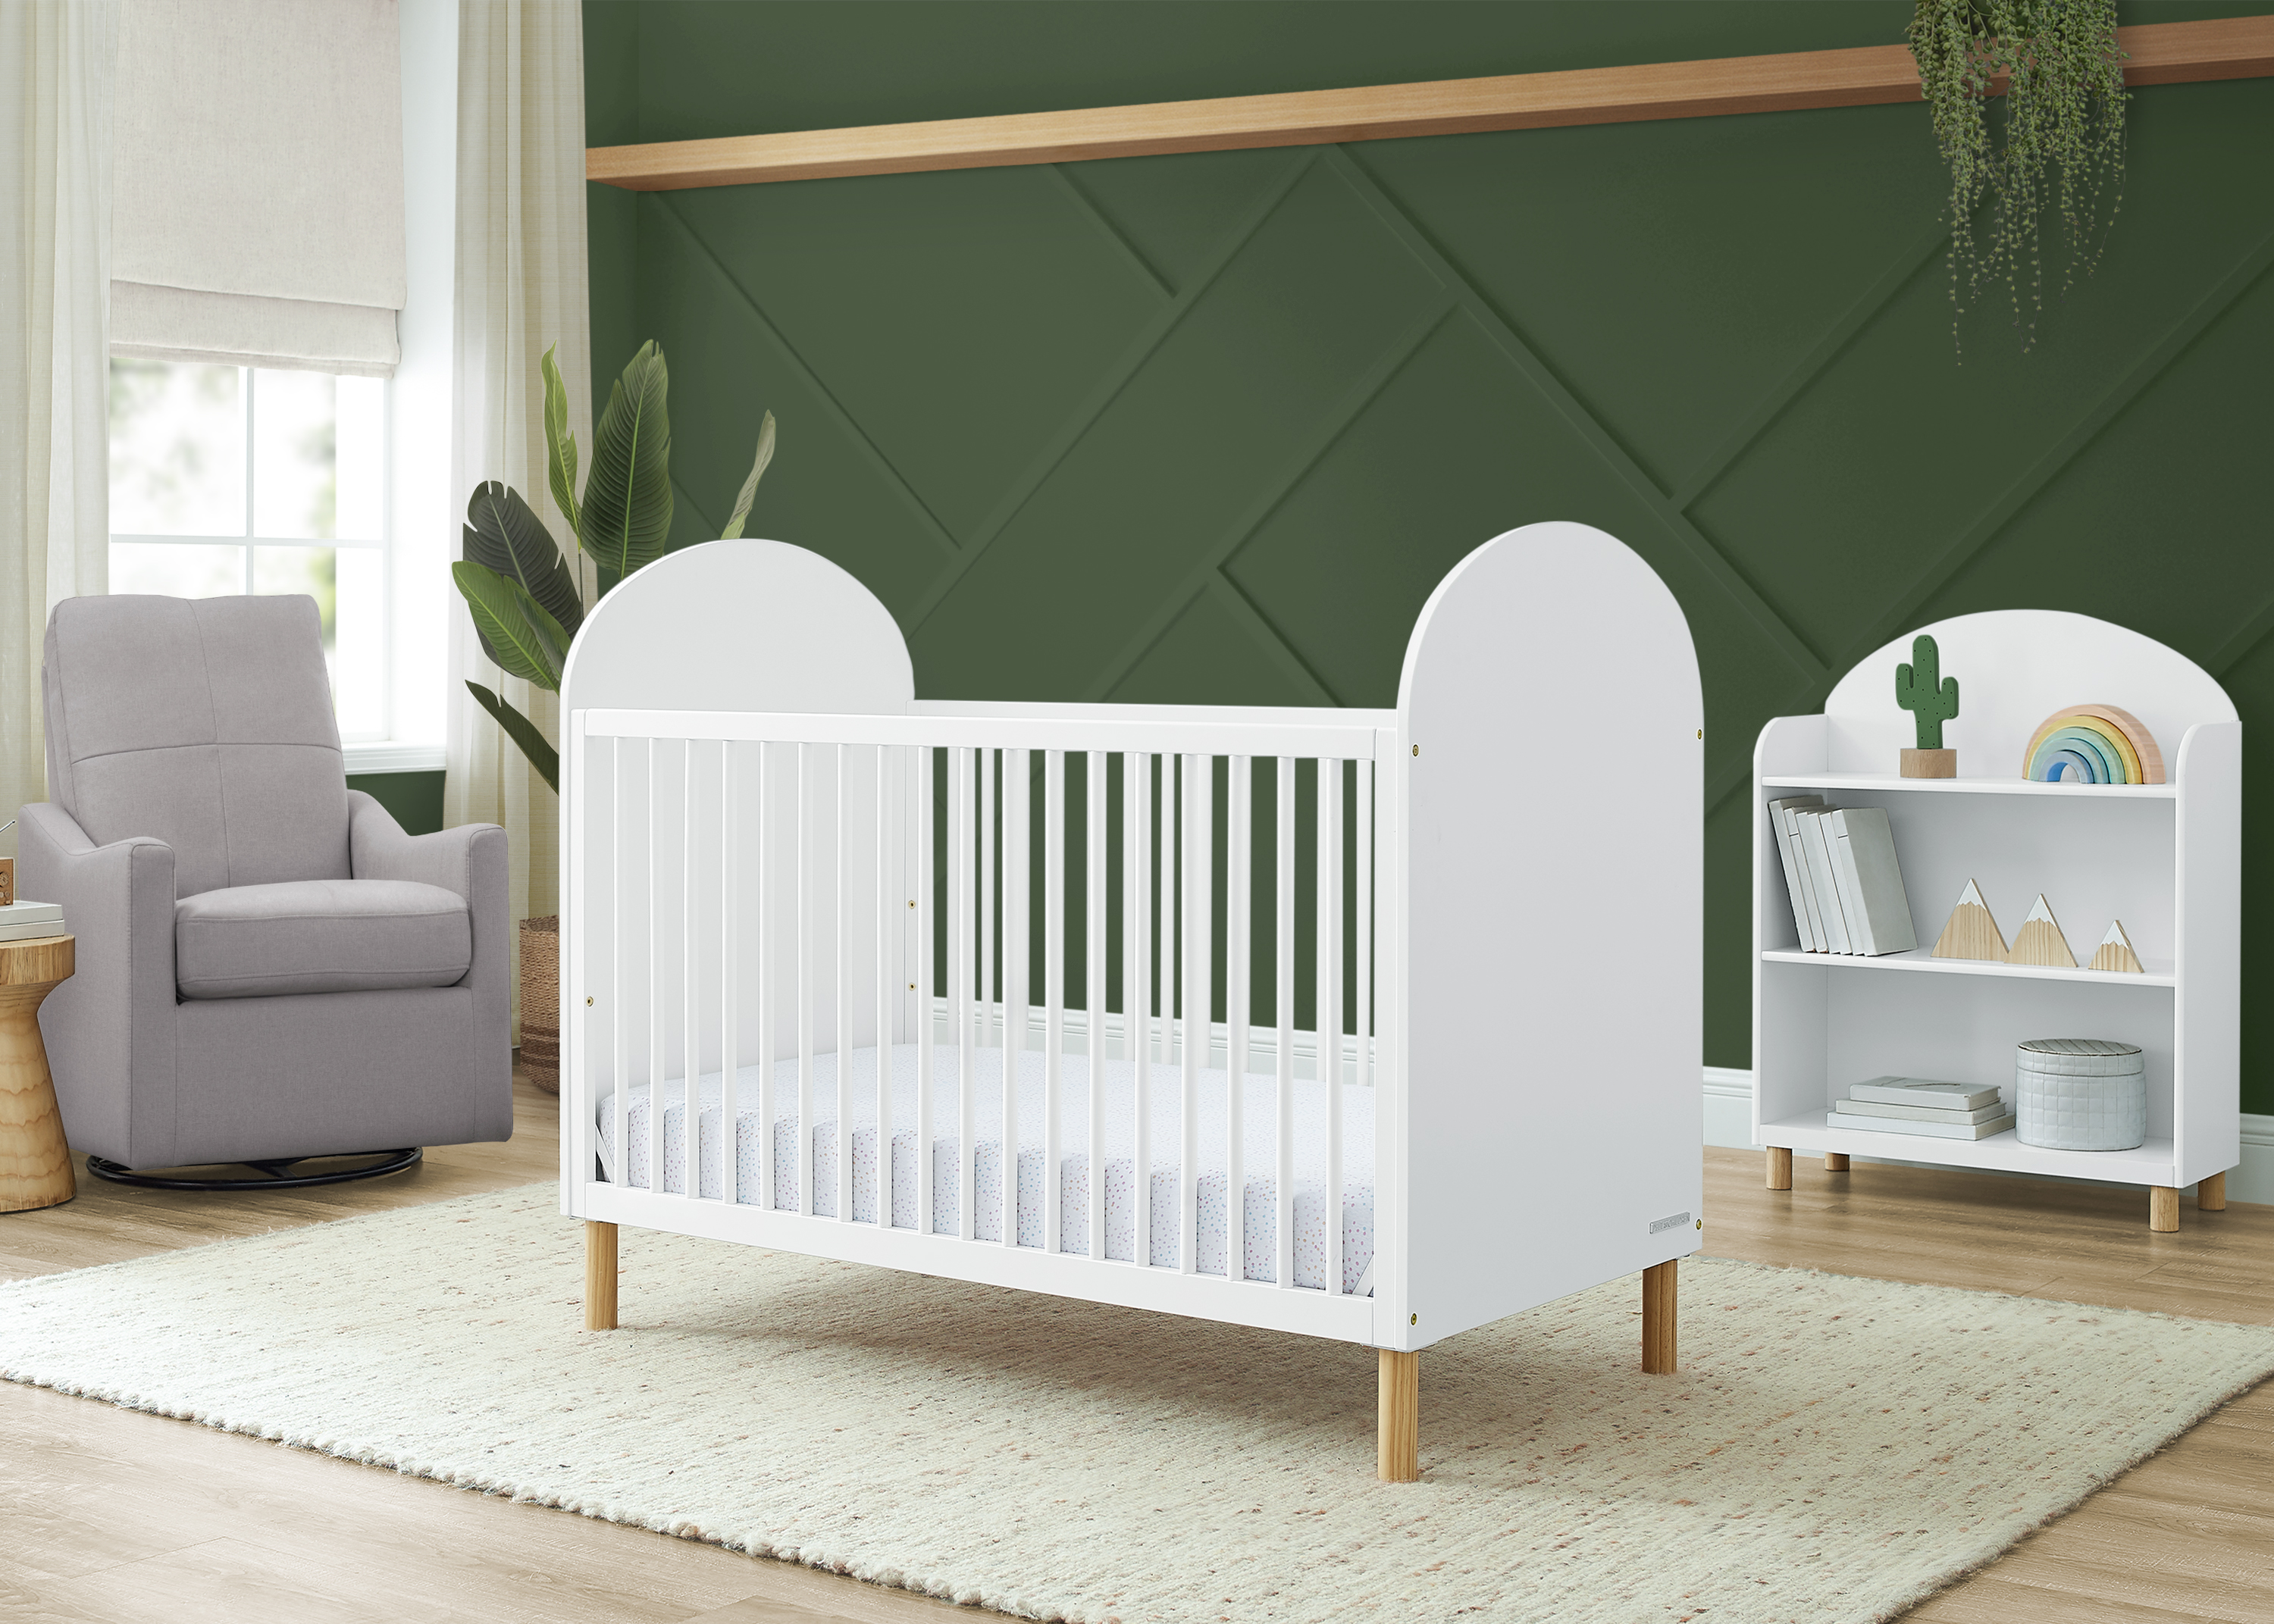 Delta Children Reese 4-in-1 Convertible Crib - Greenguard Gold Certified, Bianca White/Natural - image 4 of 19